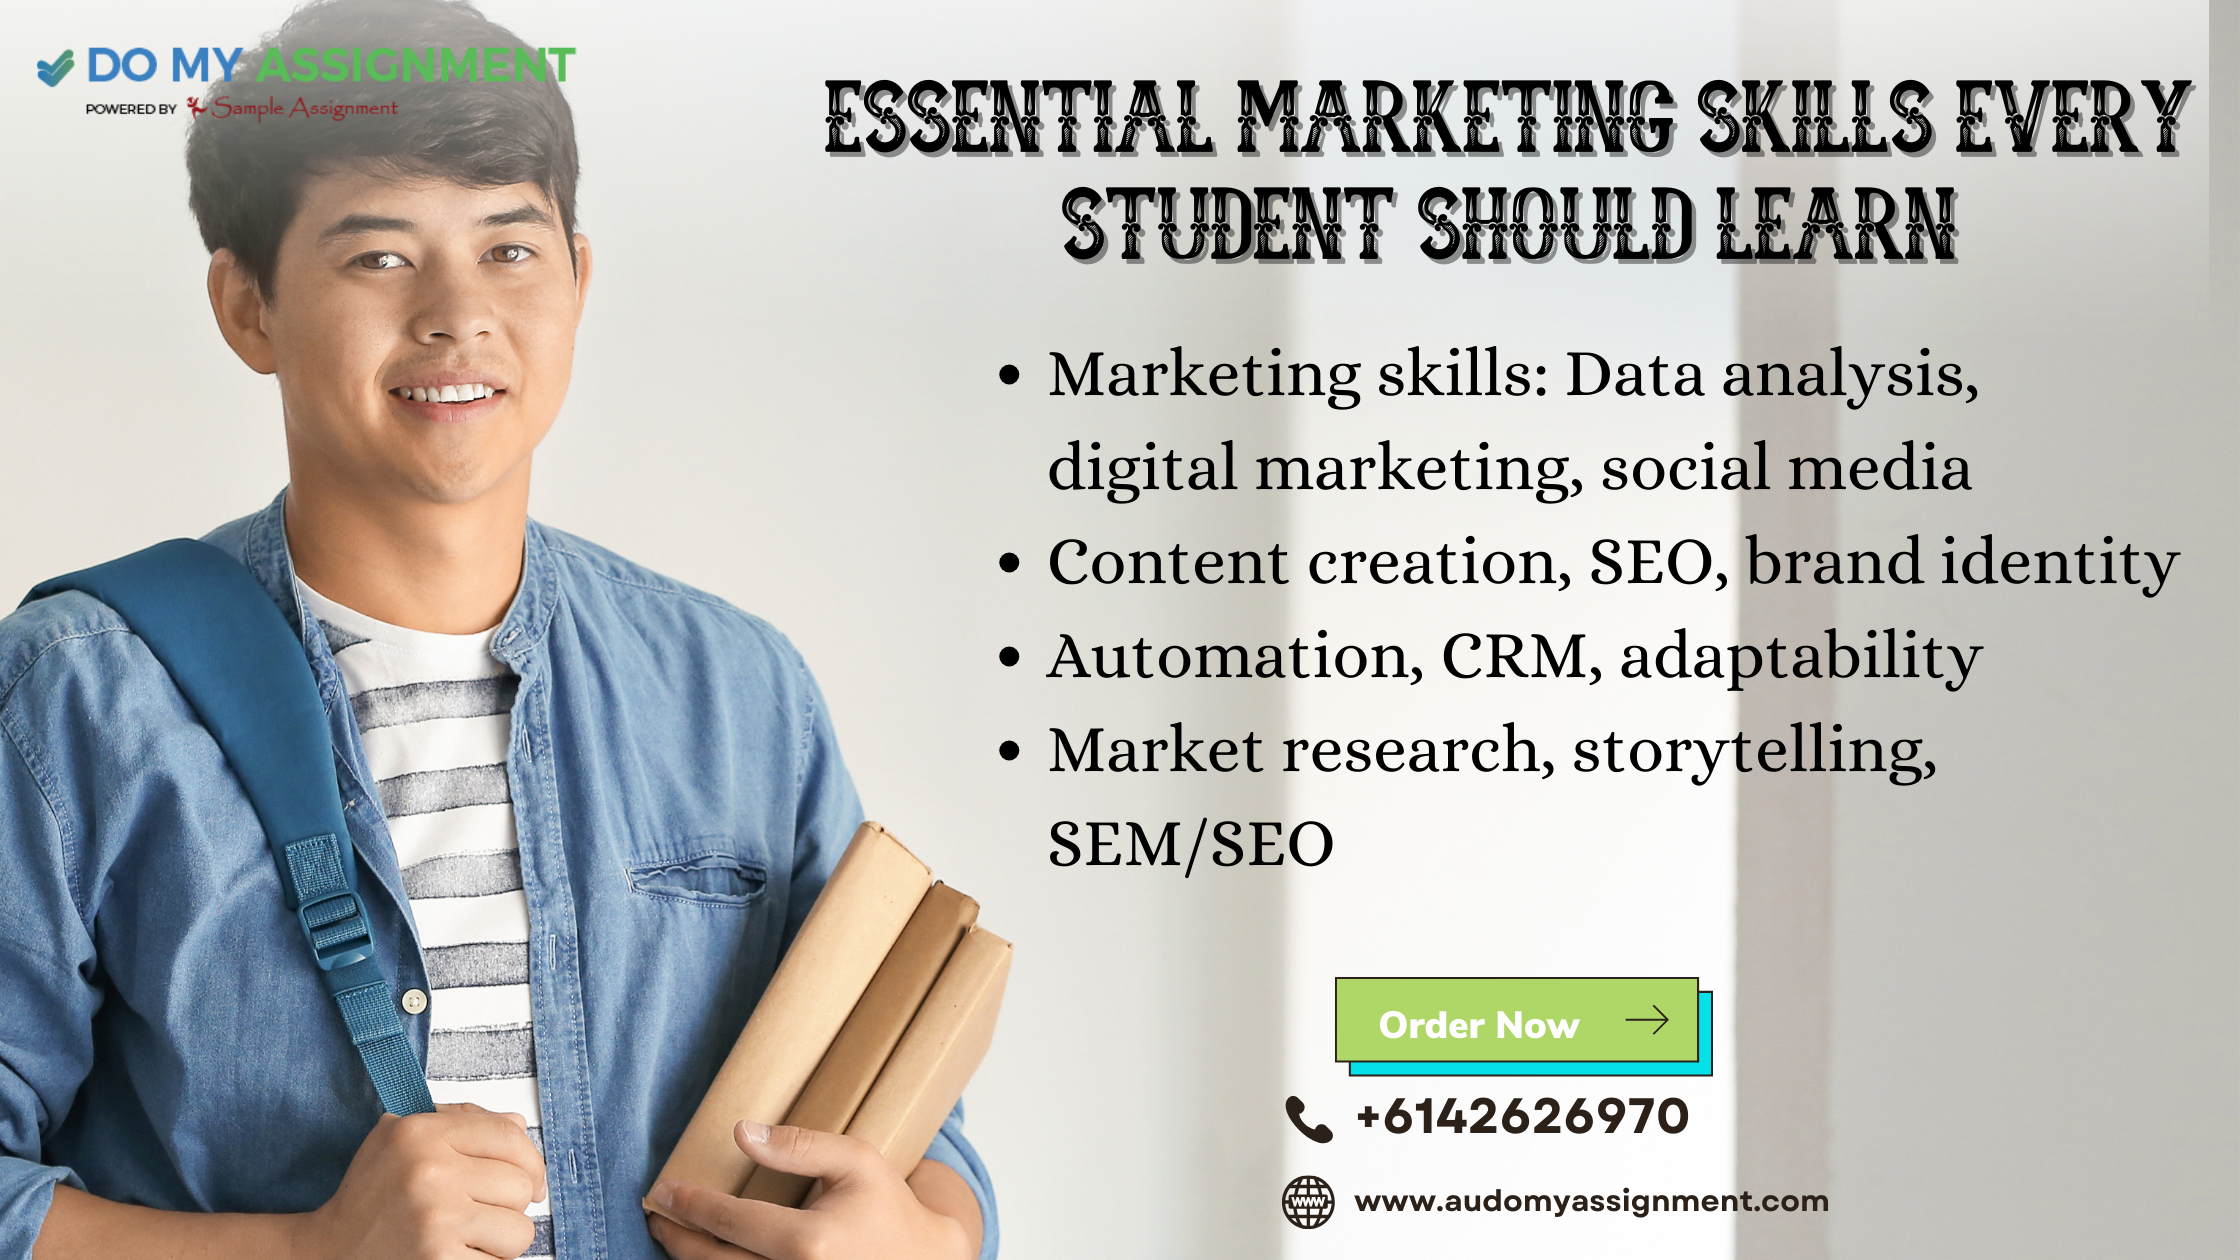 Essential Marketing Skills Every Student Should Learn